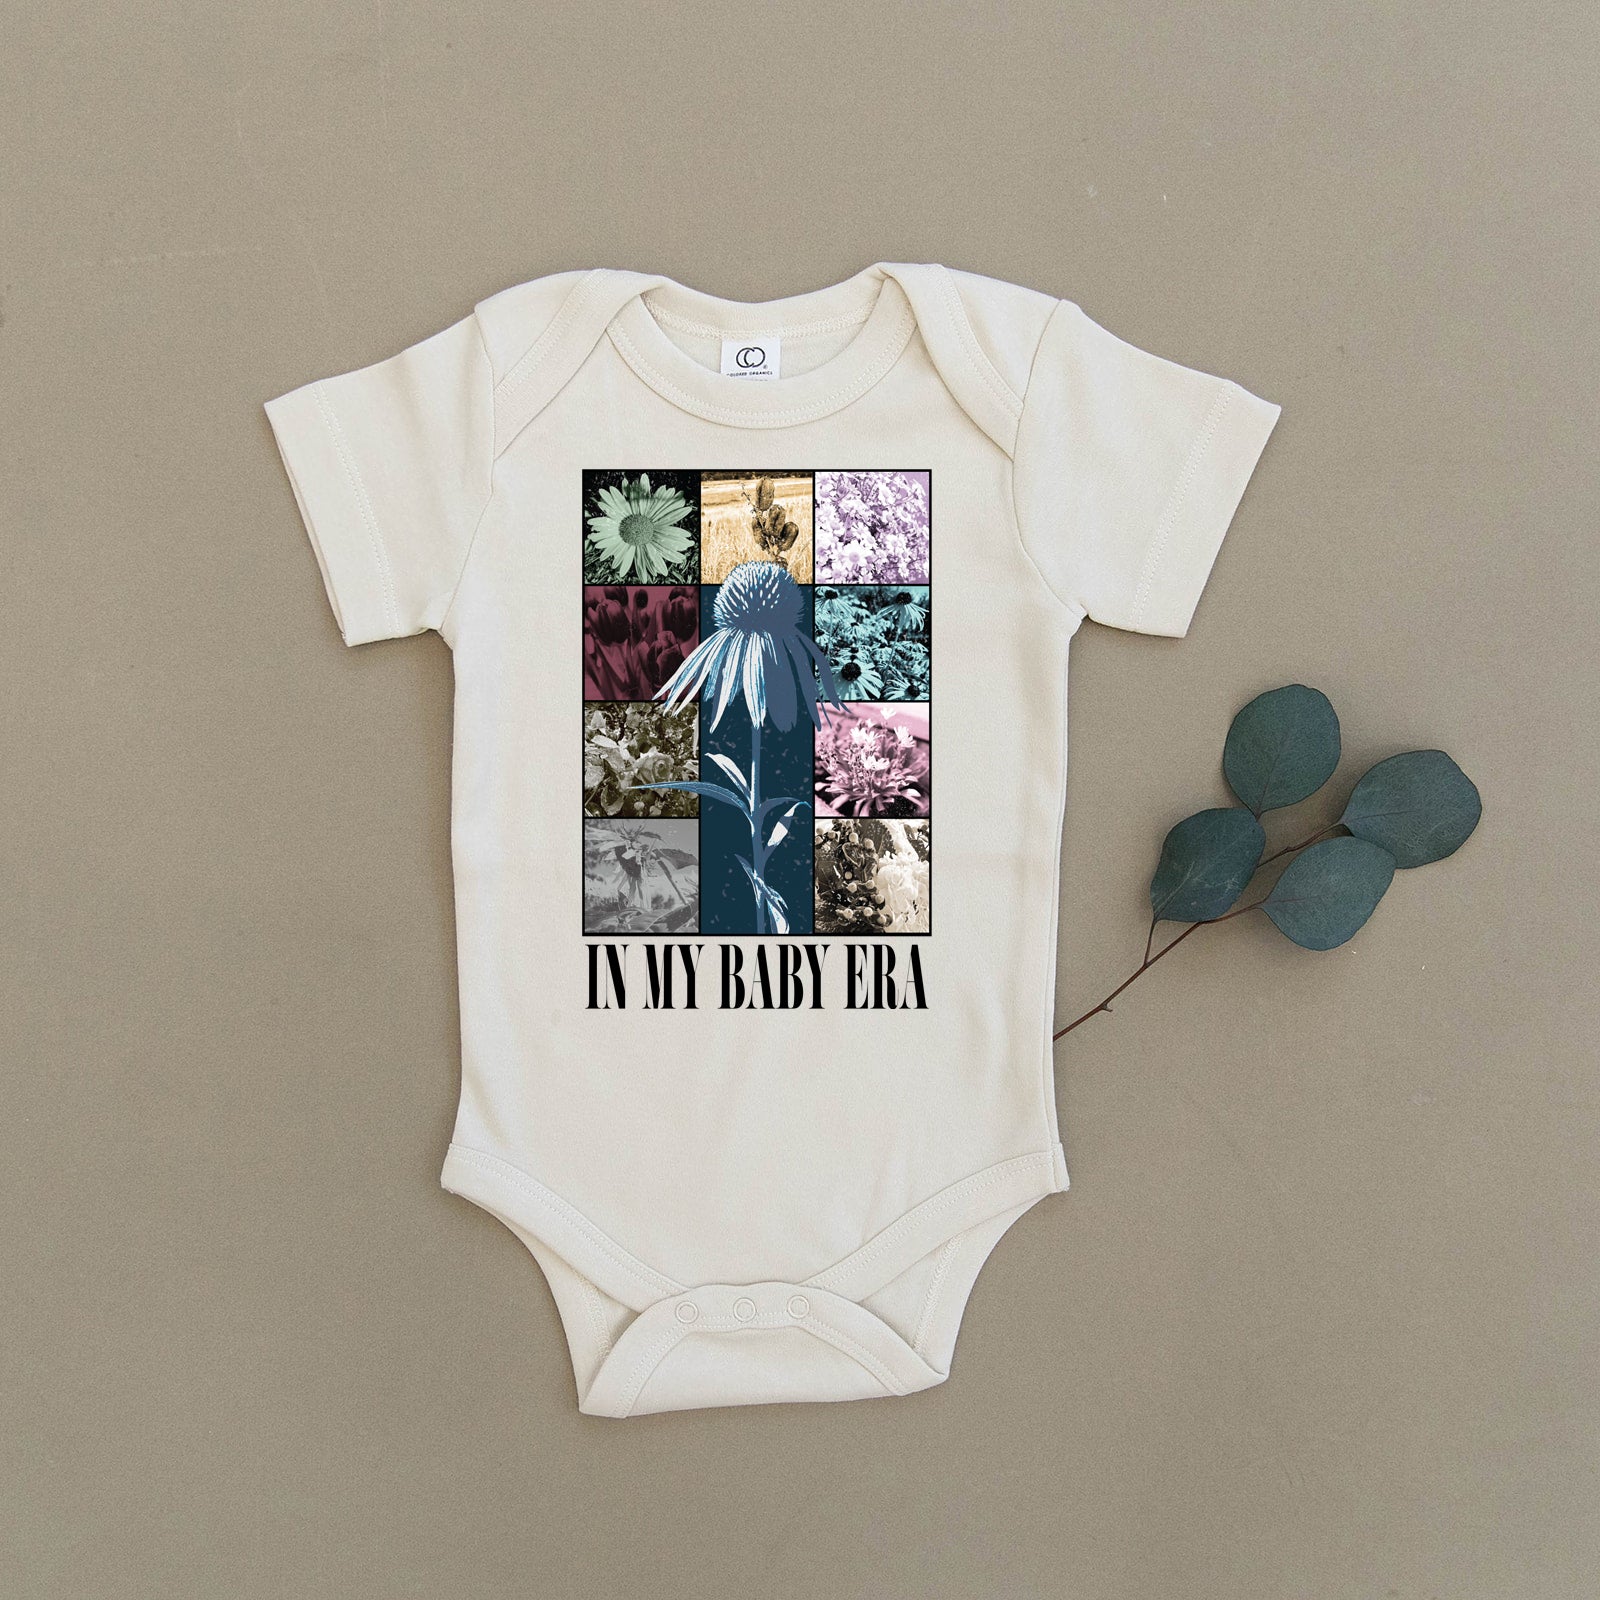 Taylor Swift Kids & Babies' Clothes for Sale